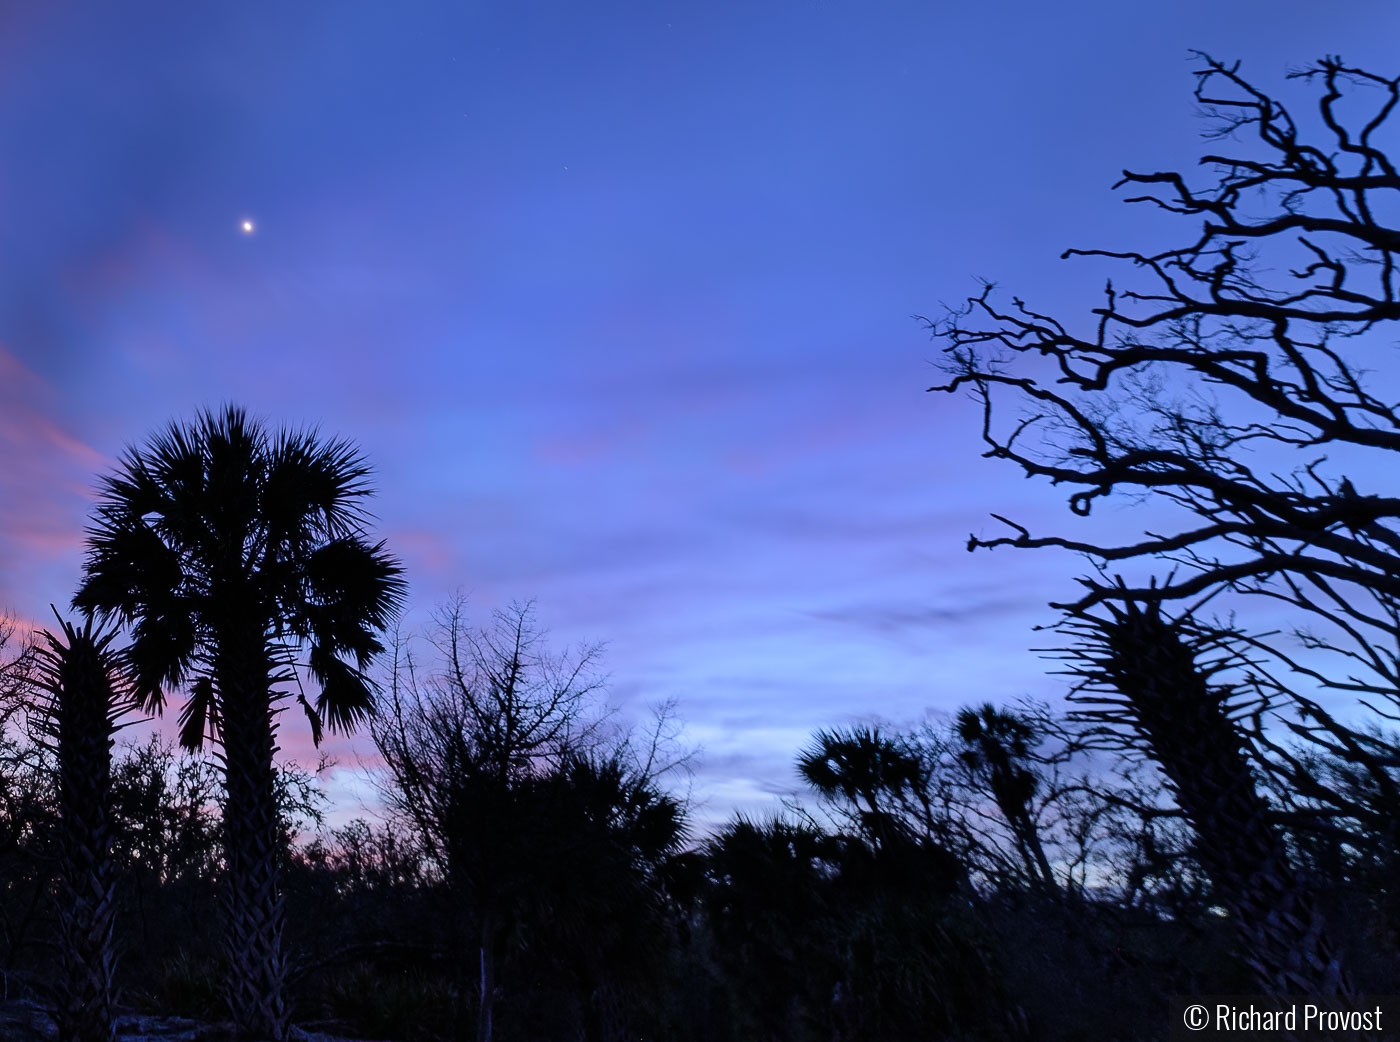 palms and cactus in nite sky by Richard Provost